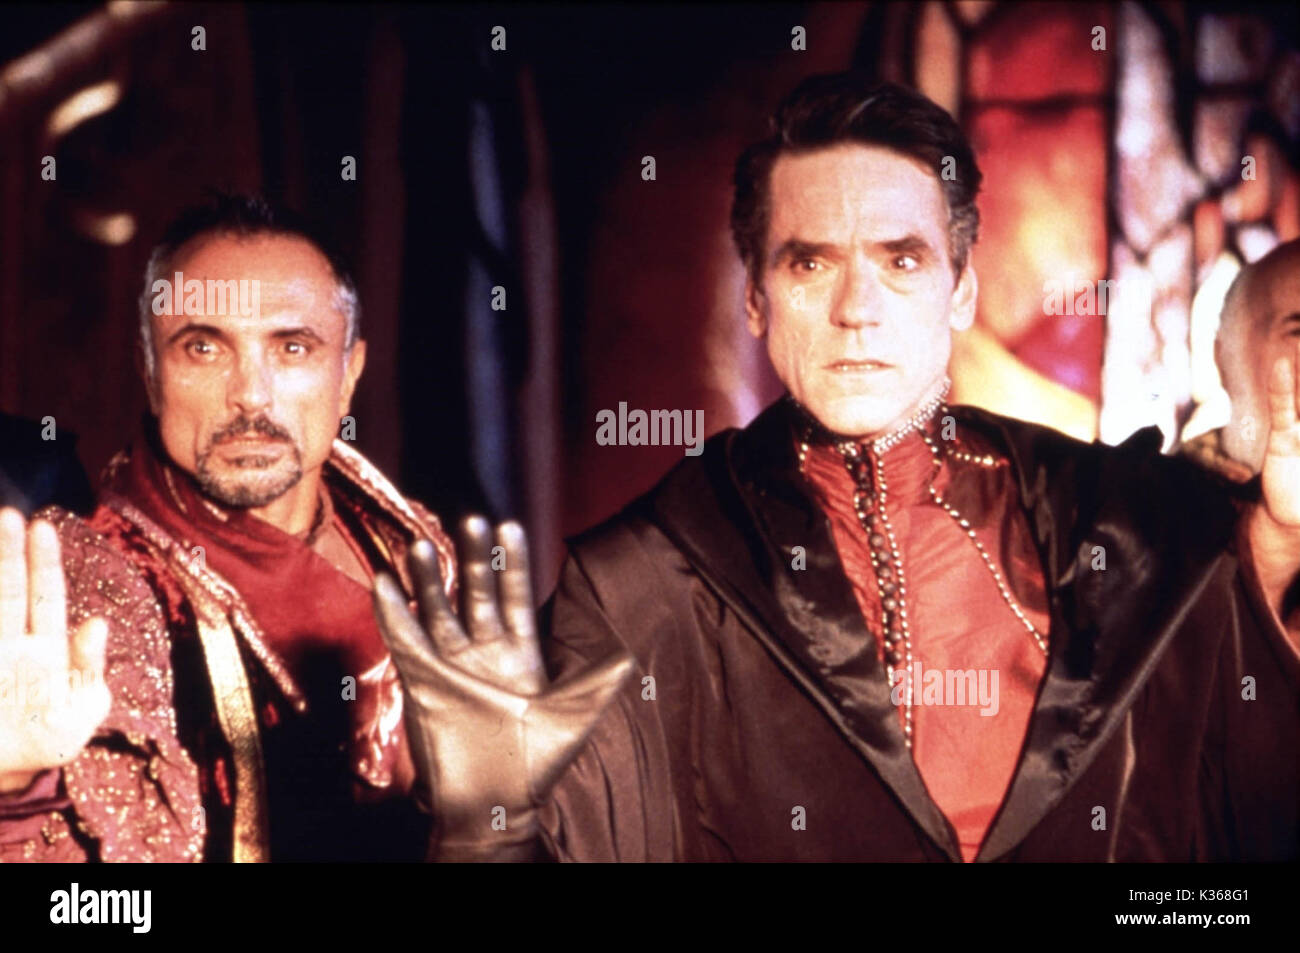 DUNGEONS & DRAGONS JEREMY IRONS     Date: 2000 Stock Photo